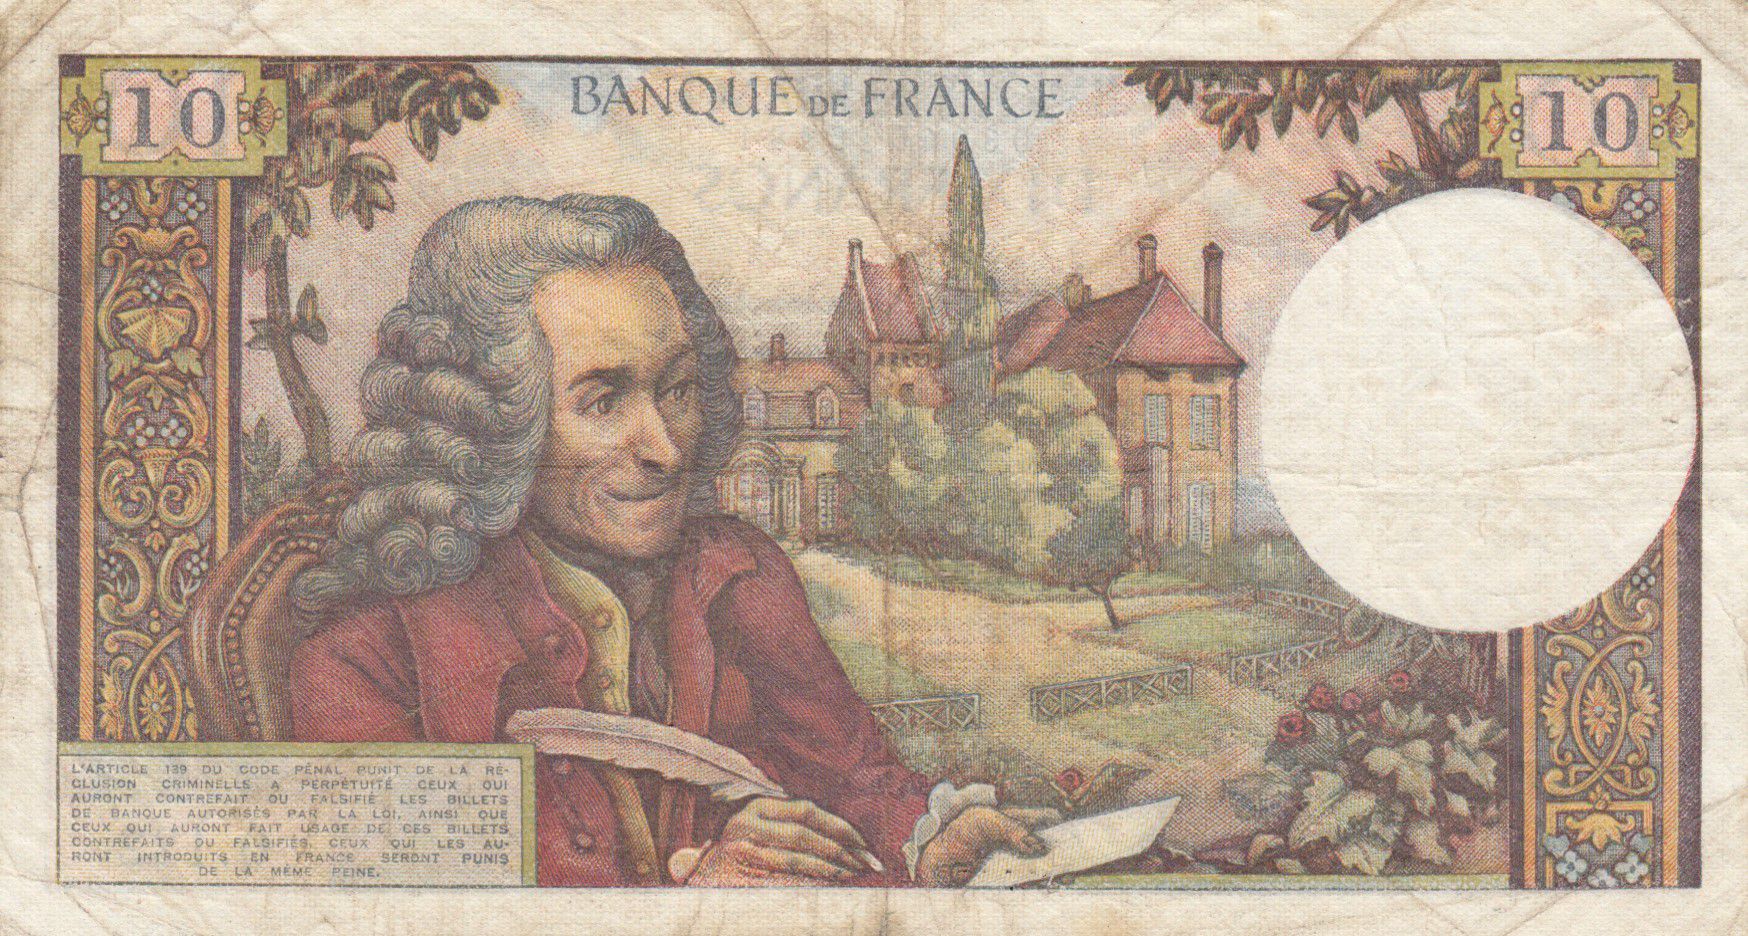 Banknote France 10 Francs Voltaire 08 01 1965 Serial Q 